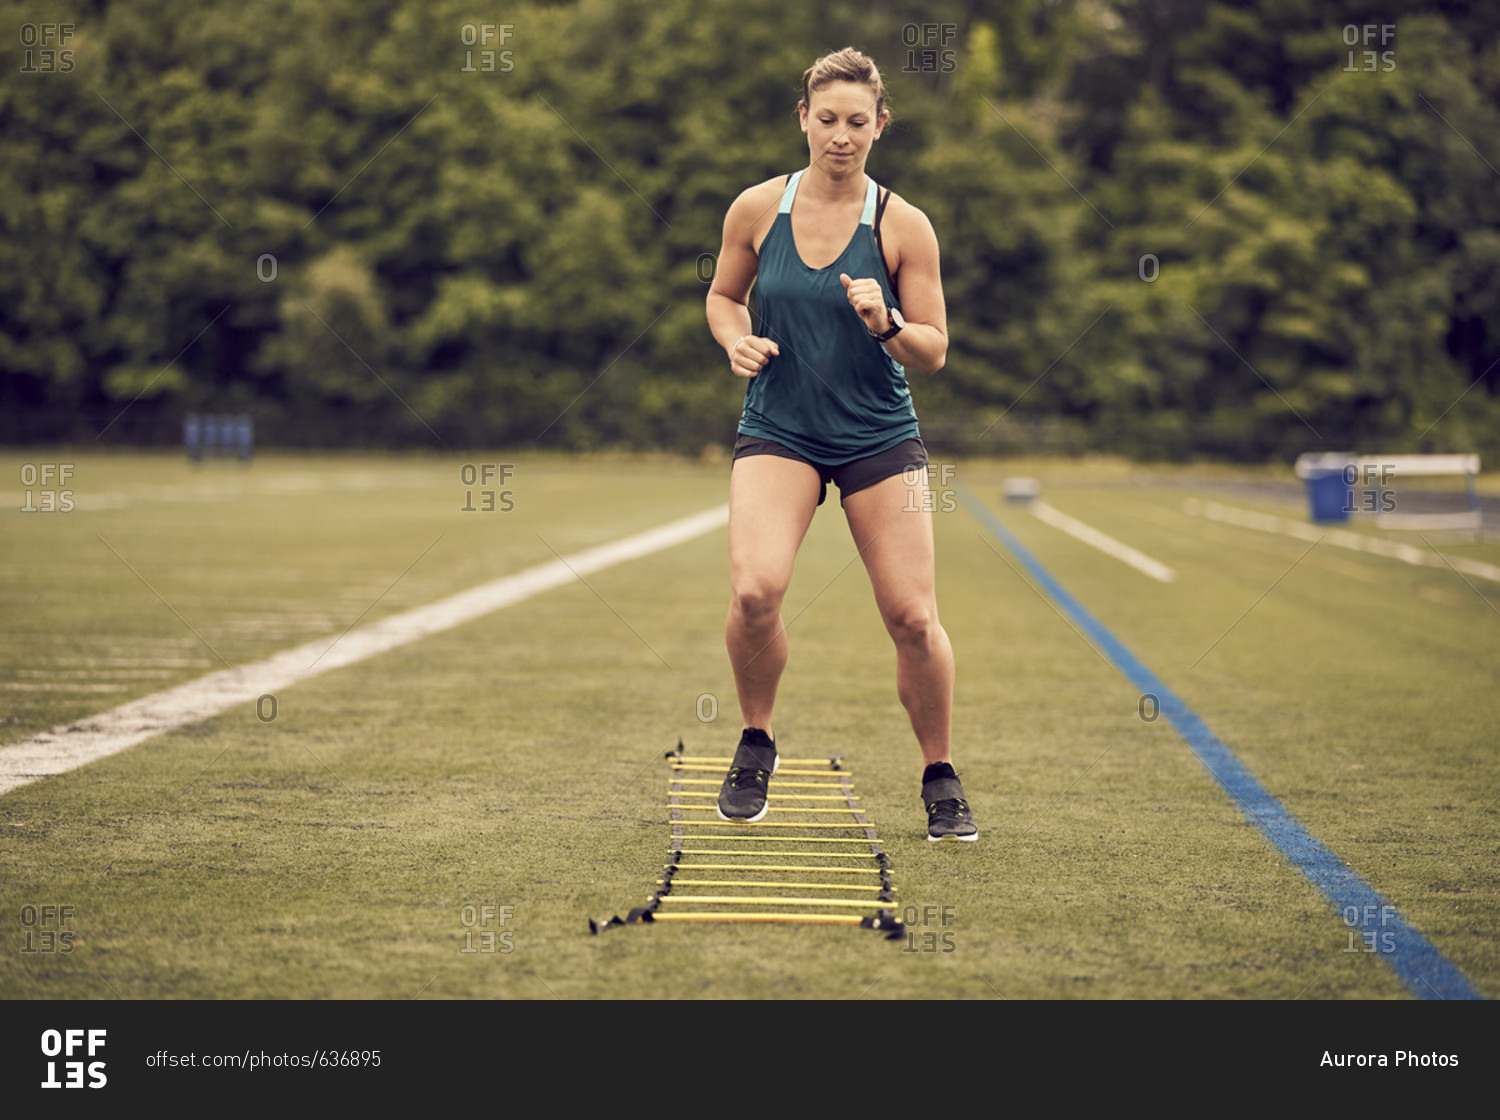 Front view of female athlete doing agility ladder exercises at athletic field, Lincoln, Massachusetts, USA